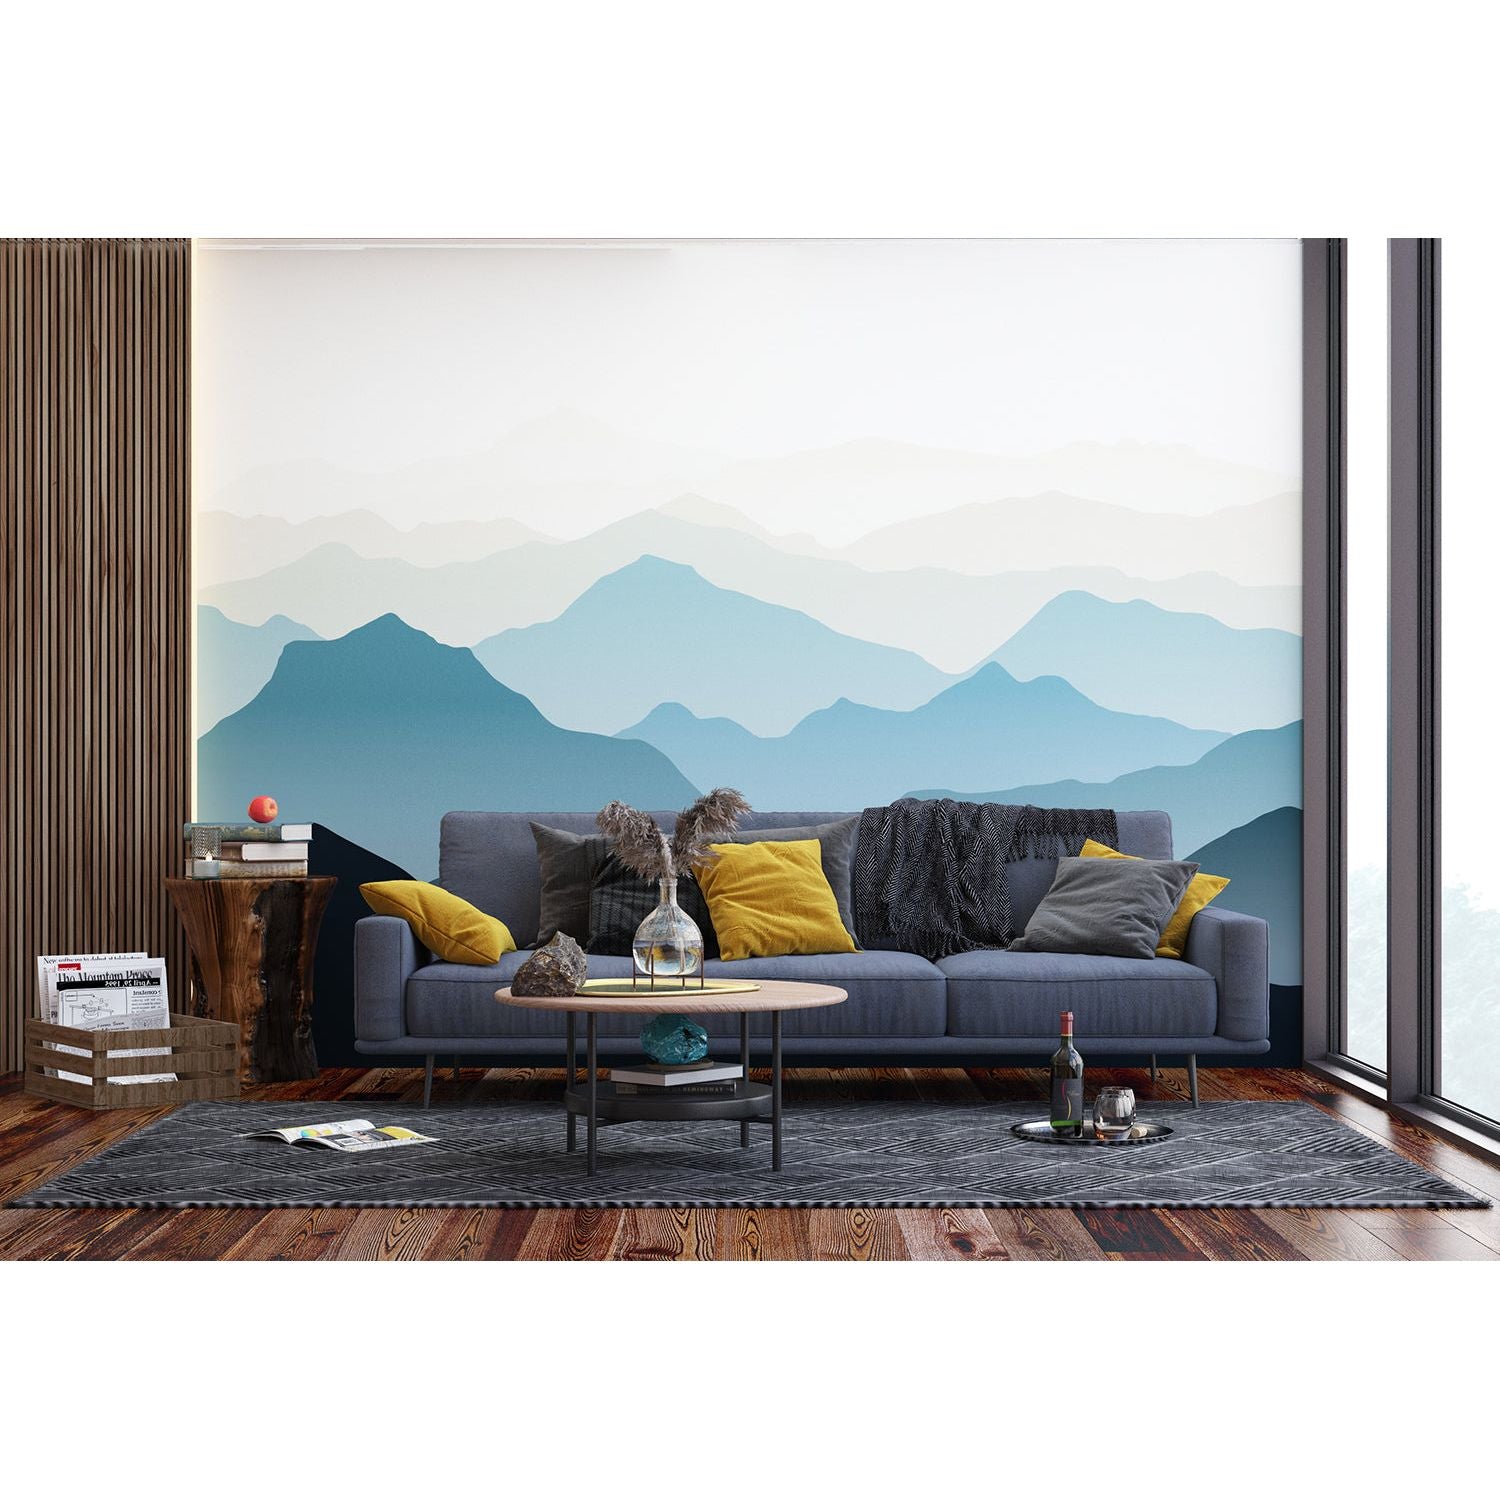 Tranquil Peaks: Black, Blue, Green Mountain Wall Mural